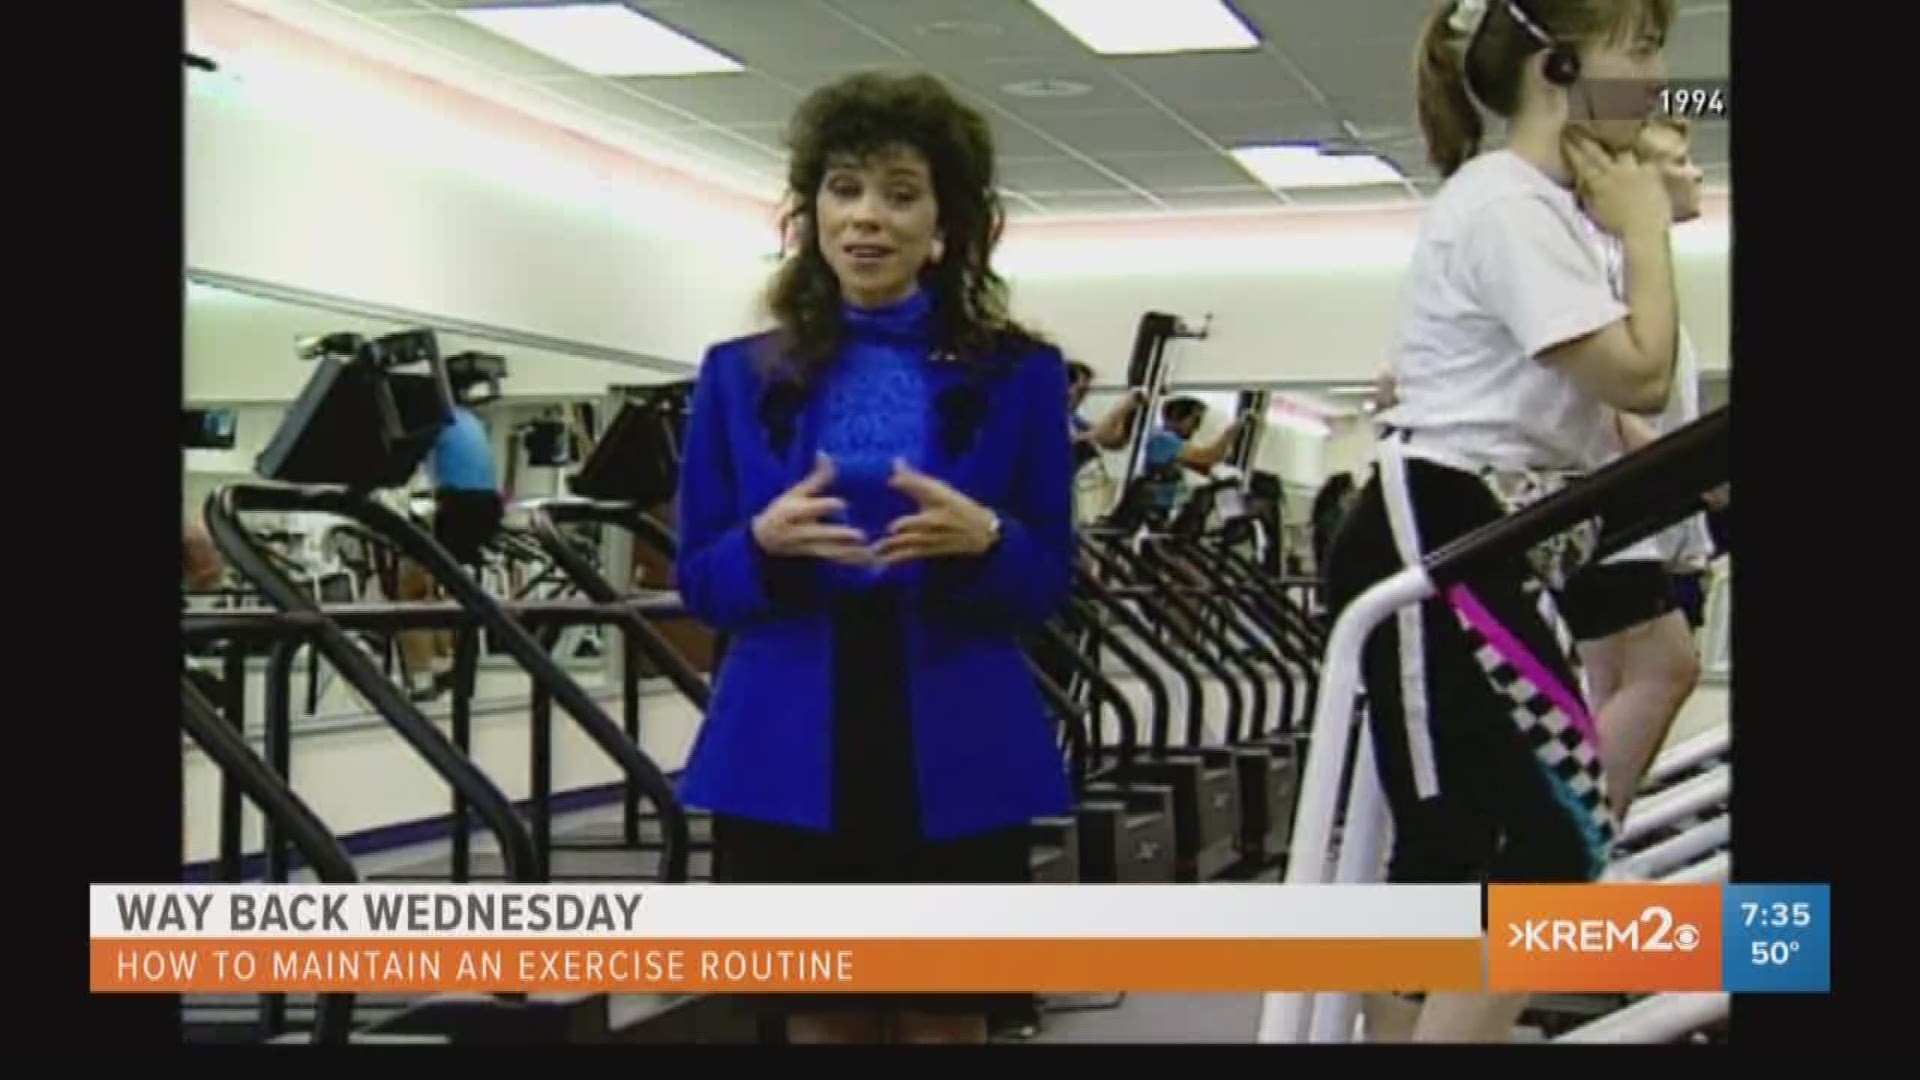 KREM is turning back the clock to 1994 for Way Back Wednesday. Former KREM 2 reporter and doctor Irene Lamberti explains to us that maintaining good health is all in the mind.